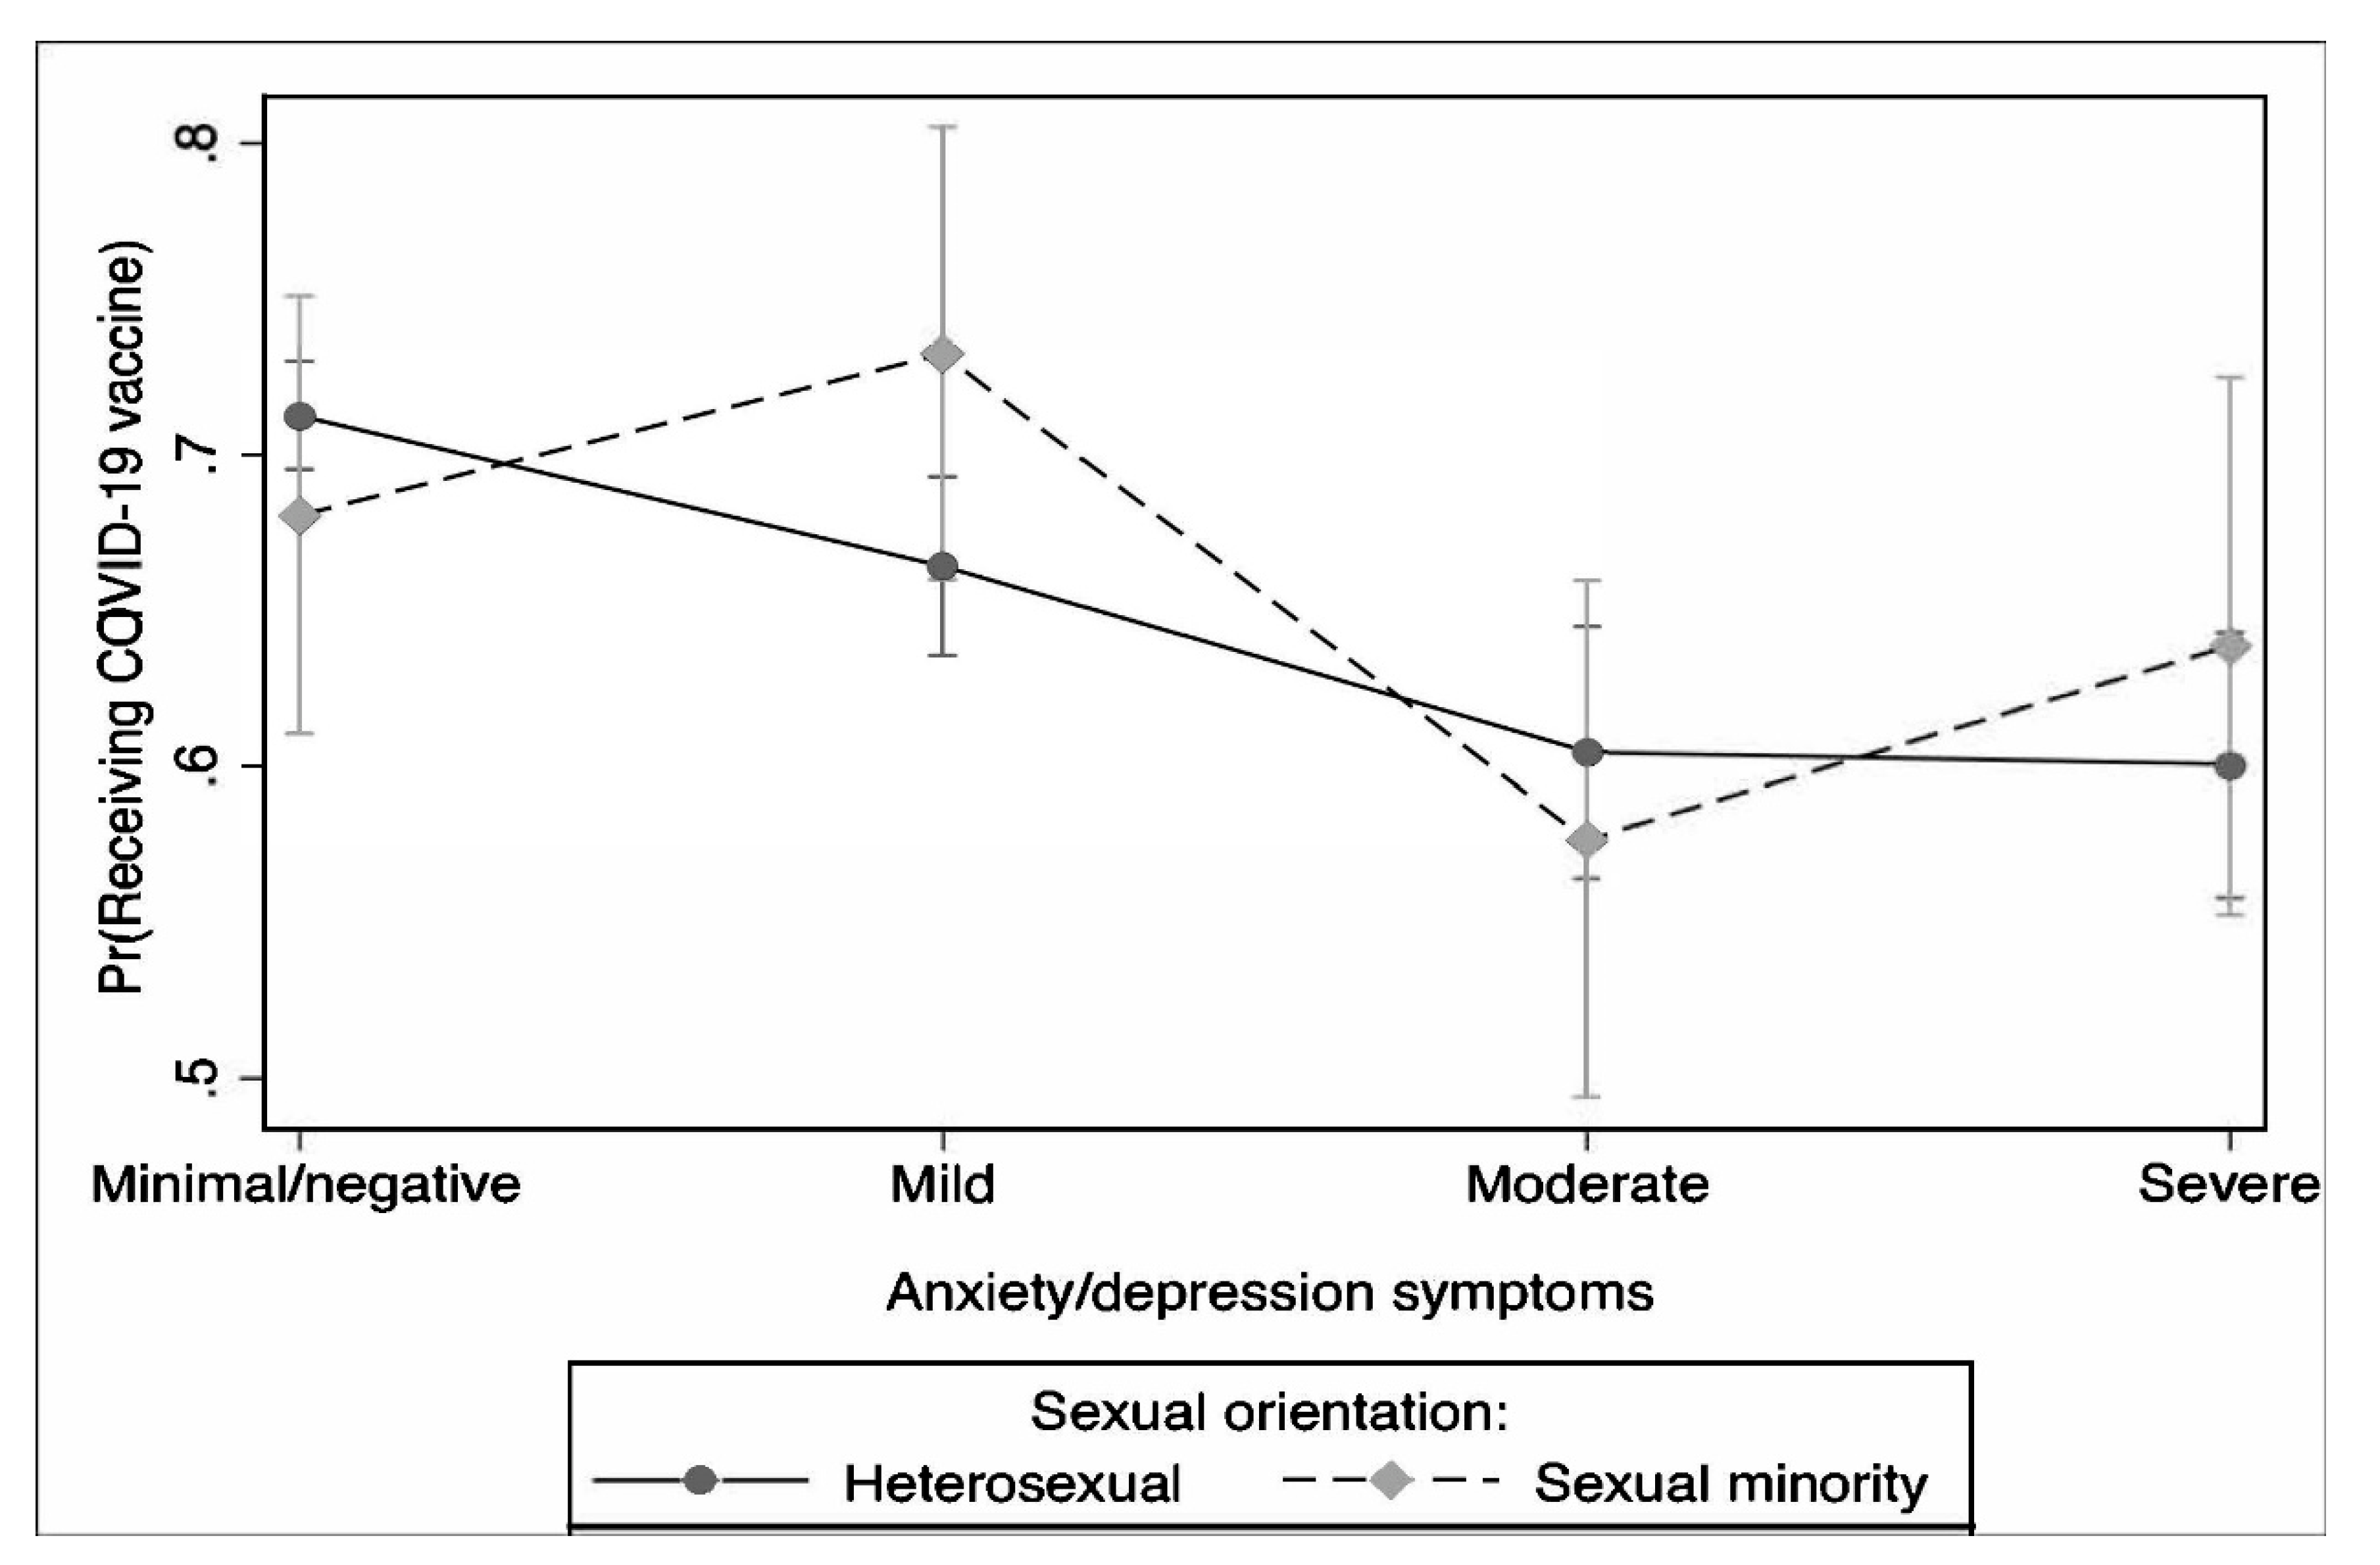 Vaccines Free Full-Text Associations between the Self-Reported Likelihood of Receiving the COVID-19 Vaccine, Likelihood of Contracting COVID-19, Discrimination, and Anxiety/Depression by Sexual Orientation